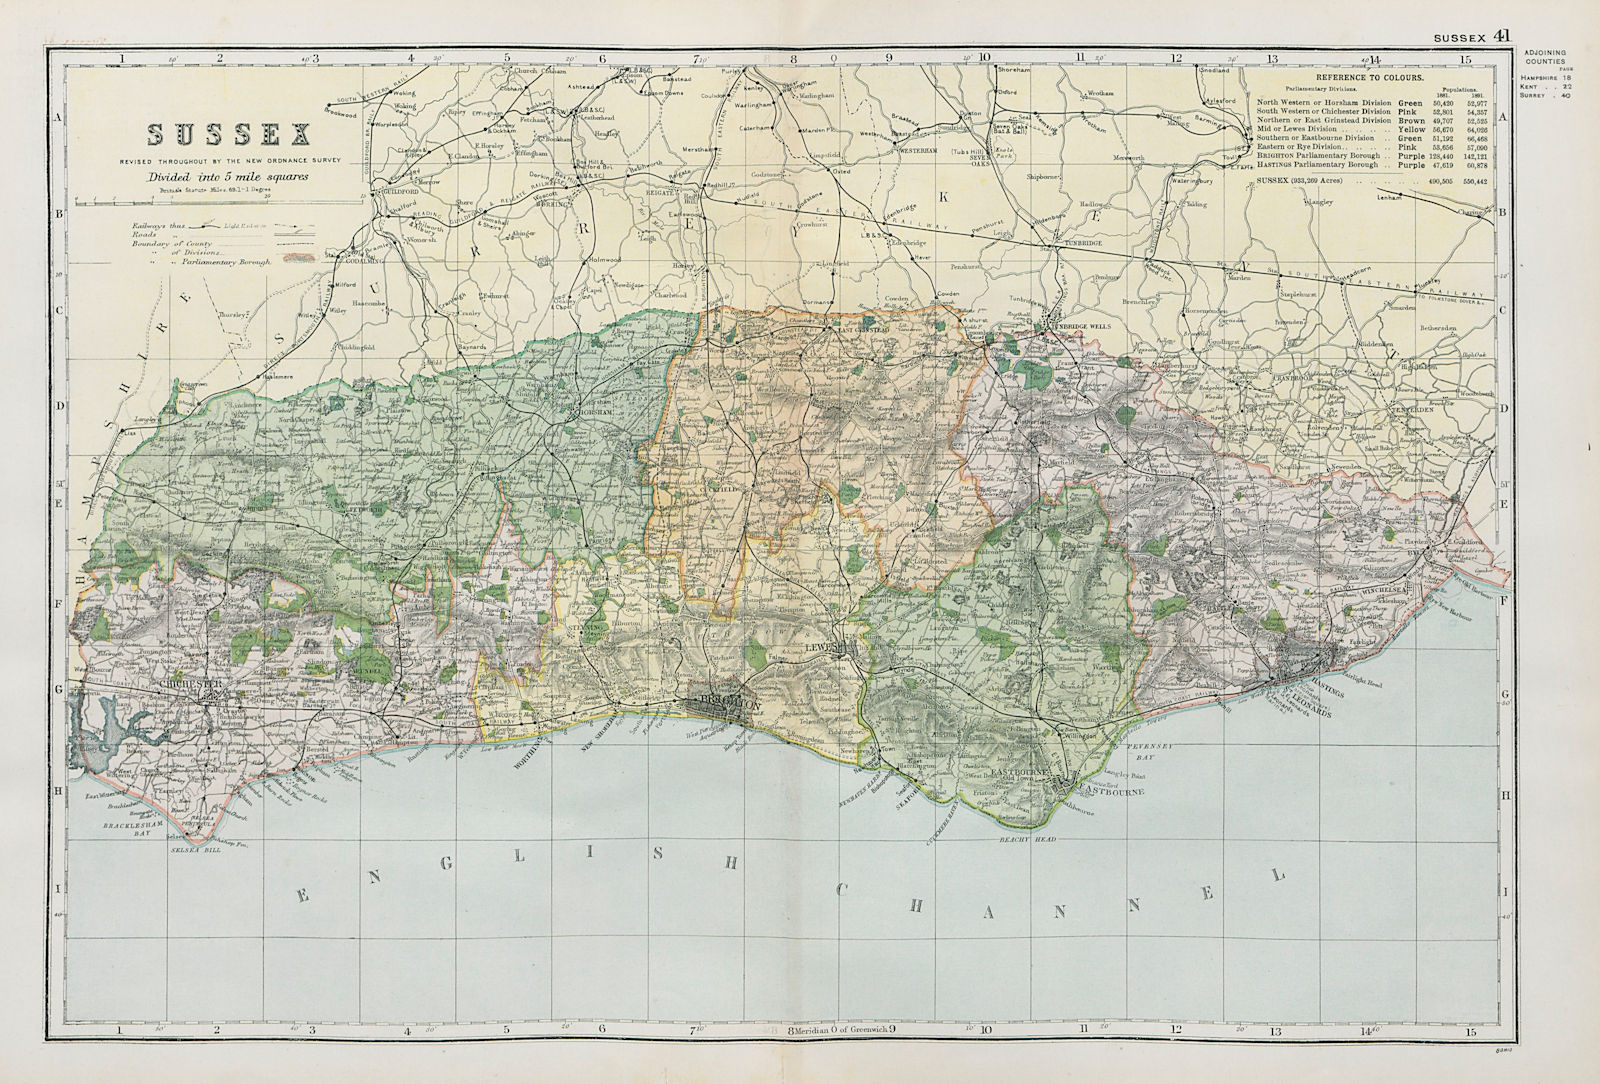 SUSSEX. Showing Parliamentary divisions, boroughs & parks. BACON 1900 old map